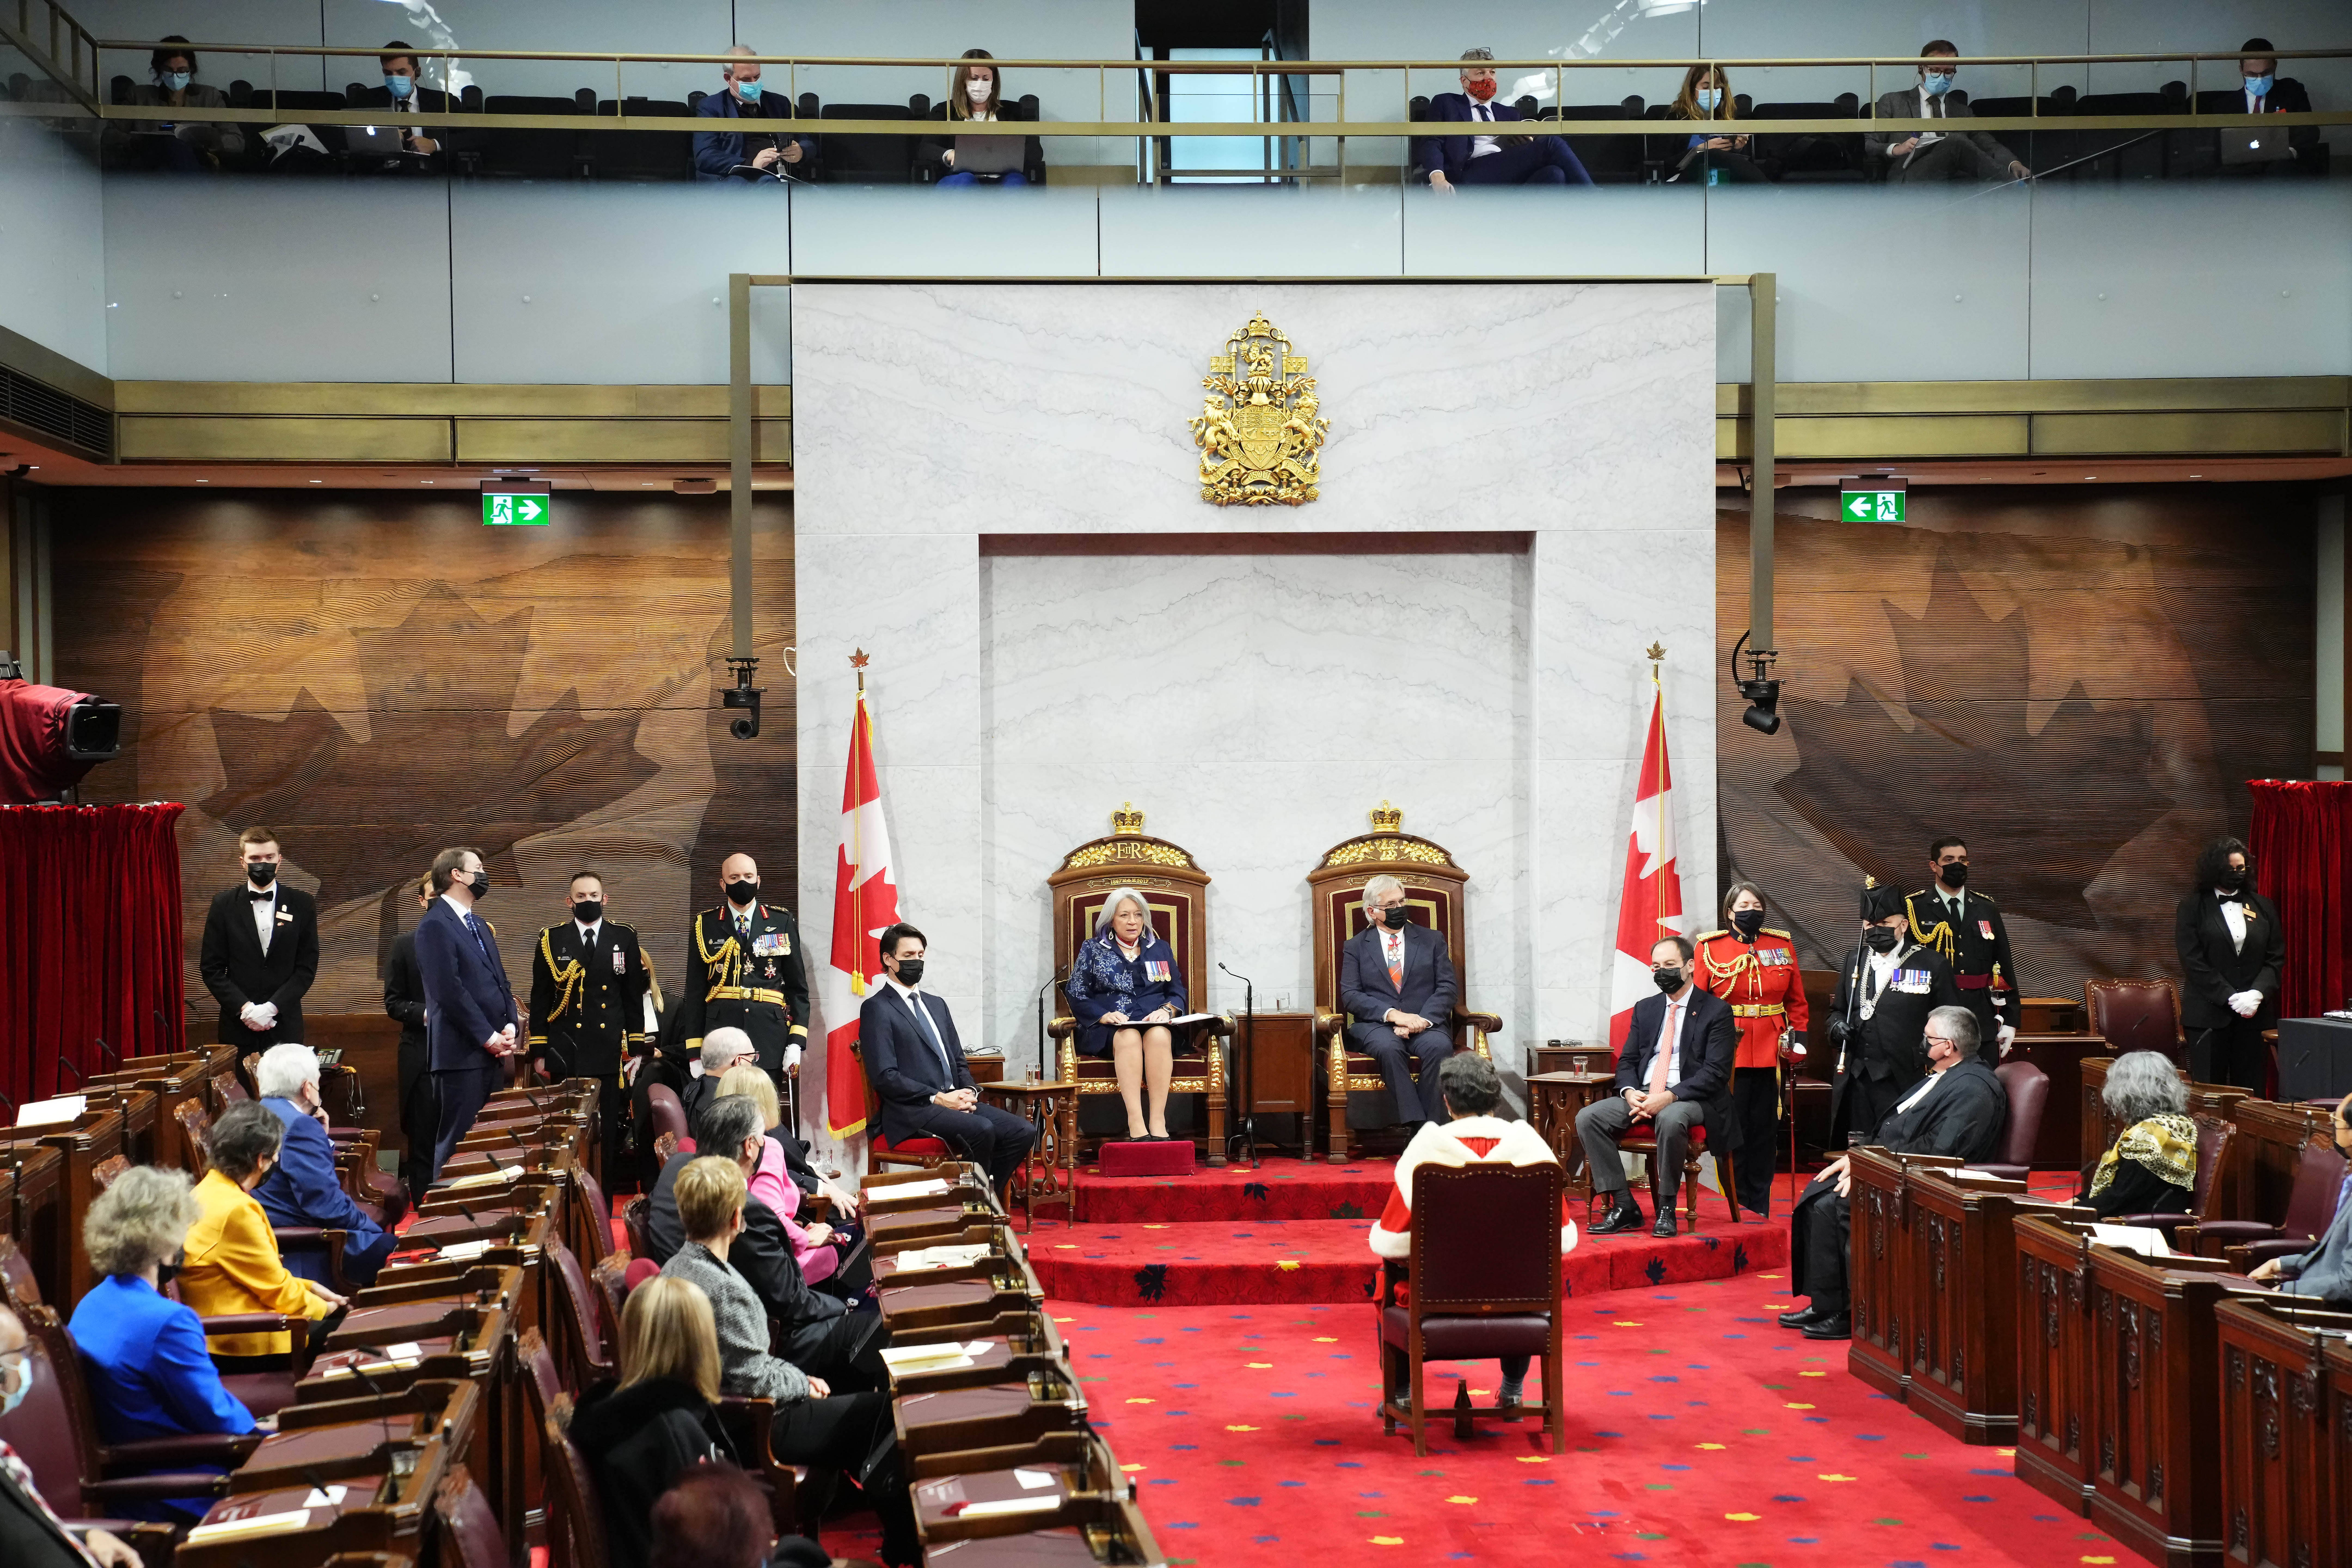 Representatives of the three branches of government gather in the Senate Chamber for the Speech from the Throne